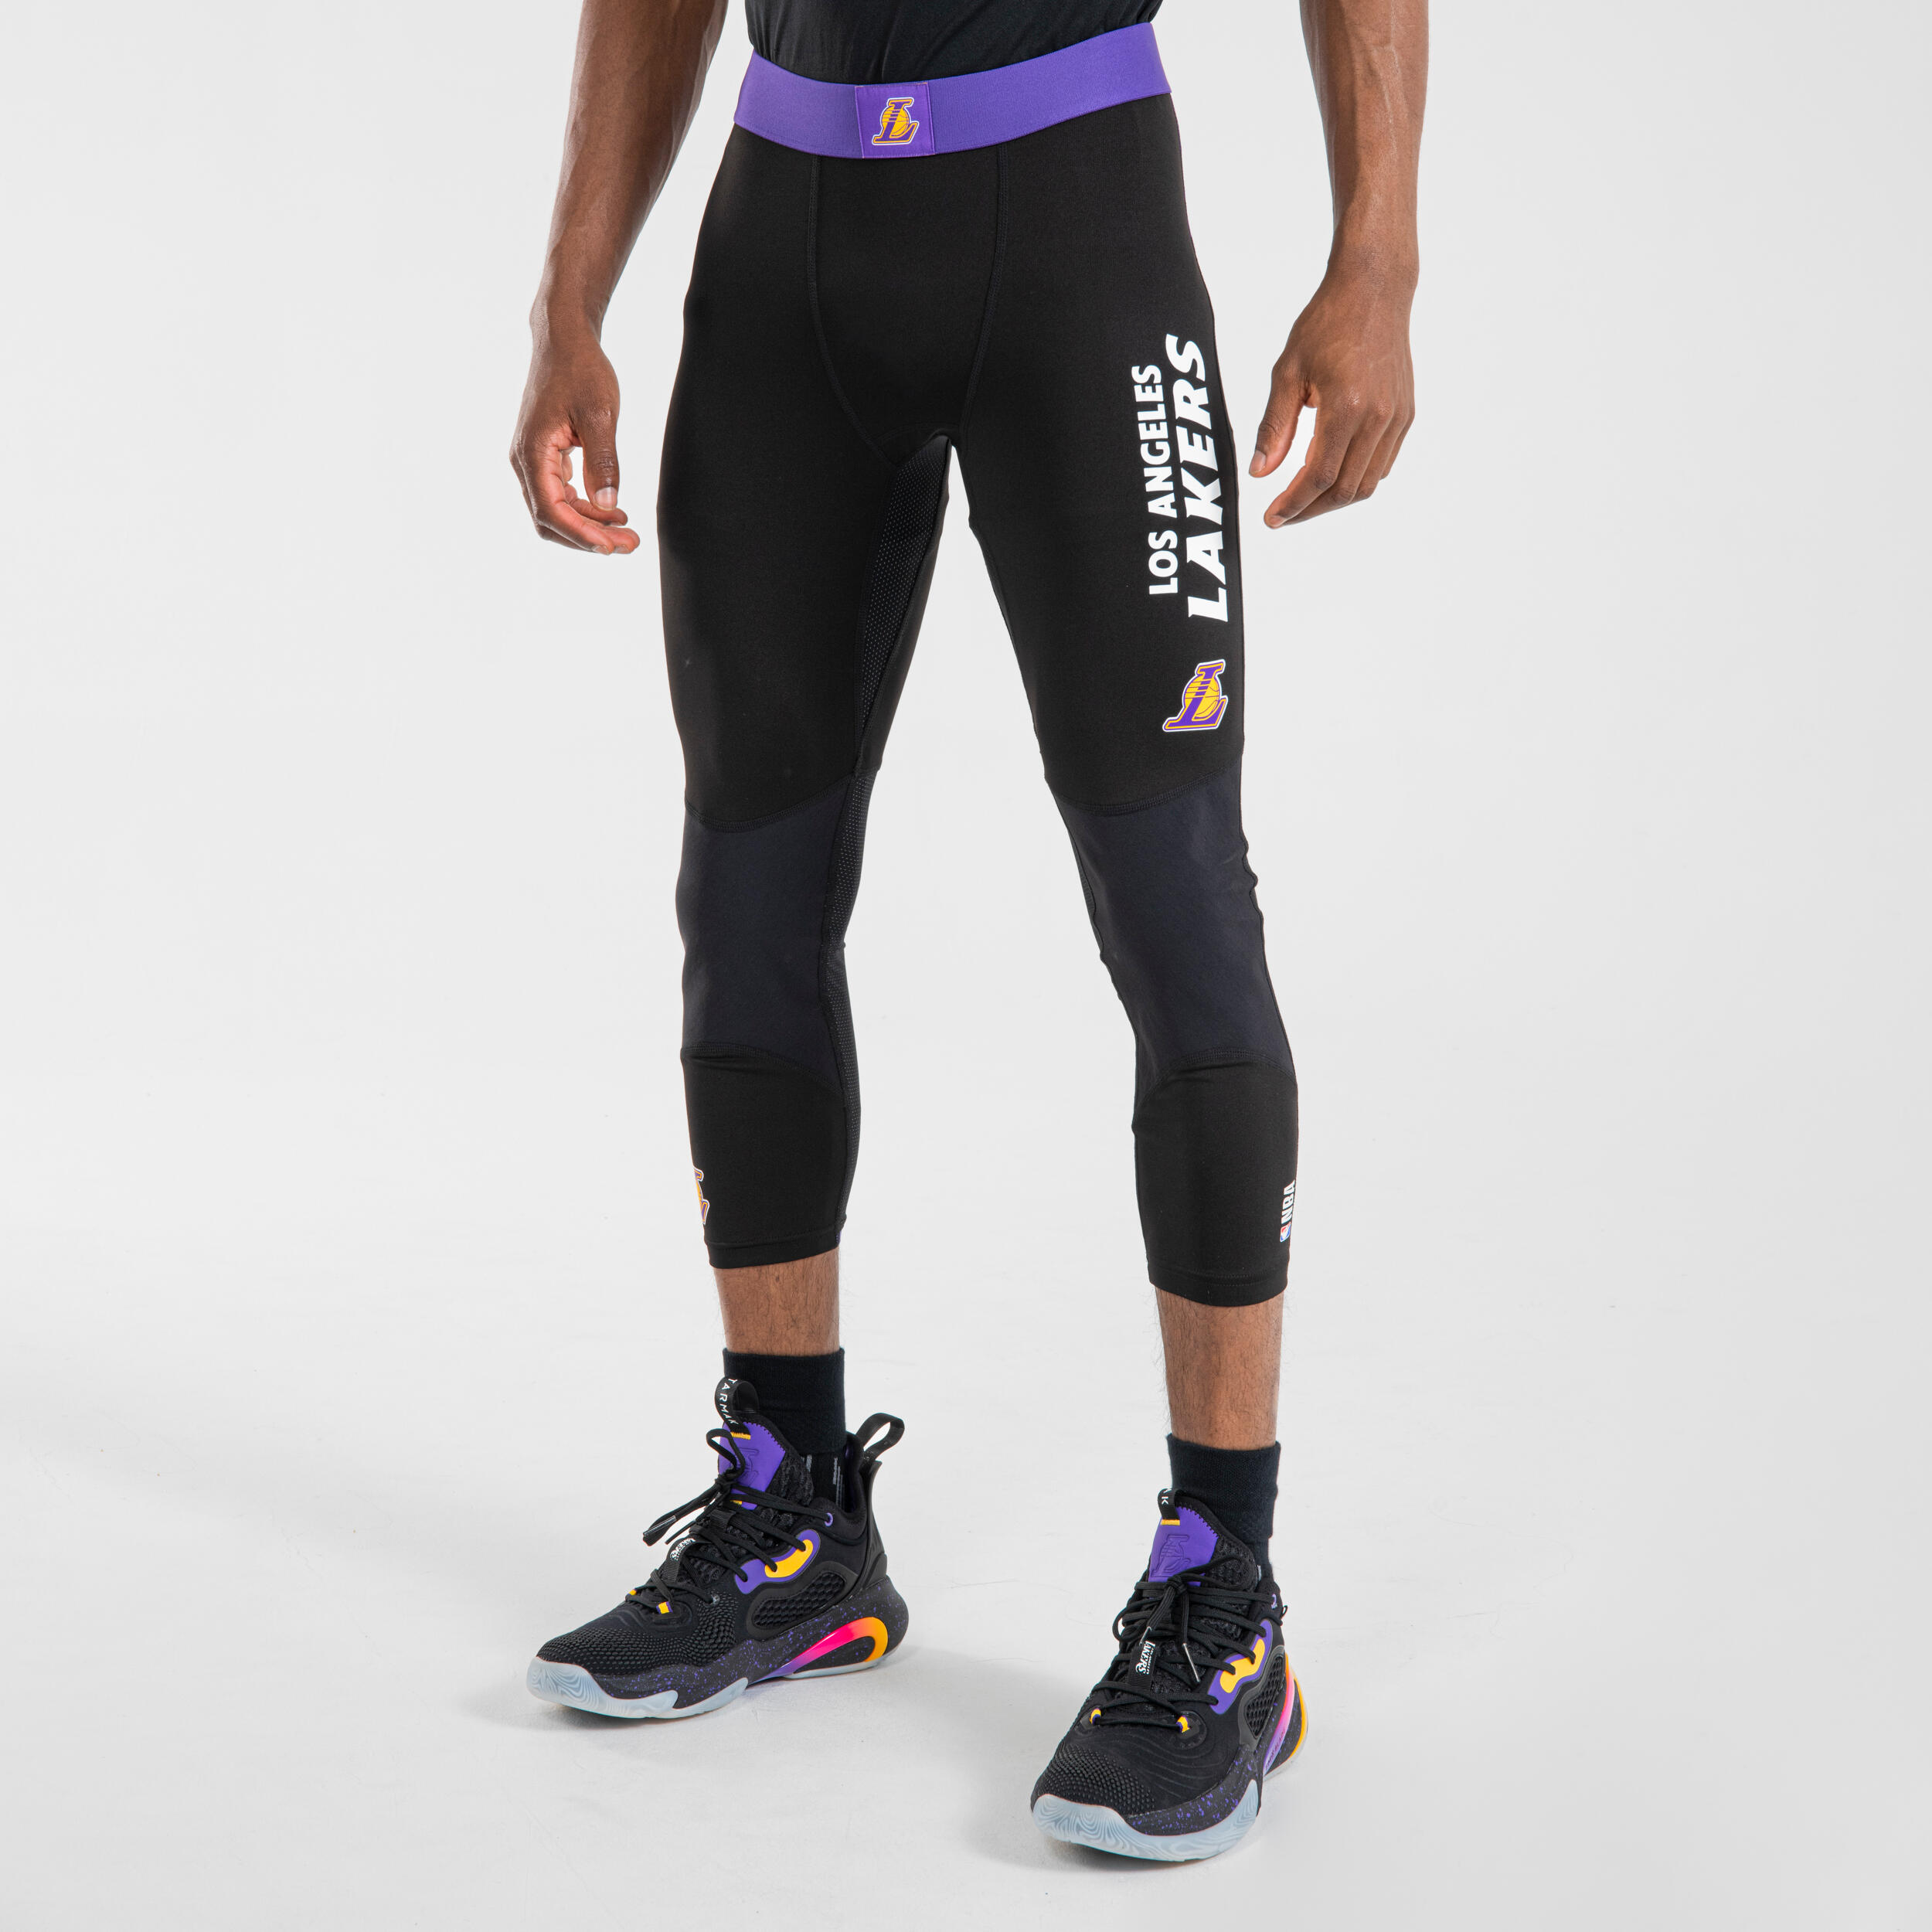 Shop leggings for basketball for Sale on Shopee Philippines